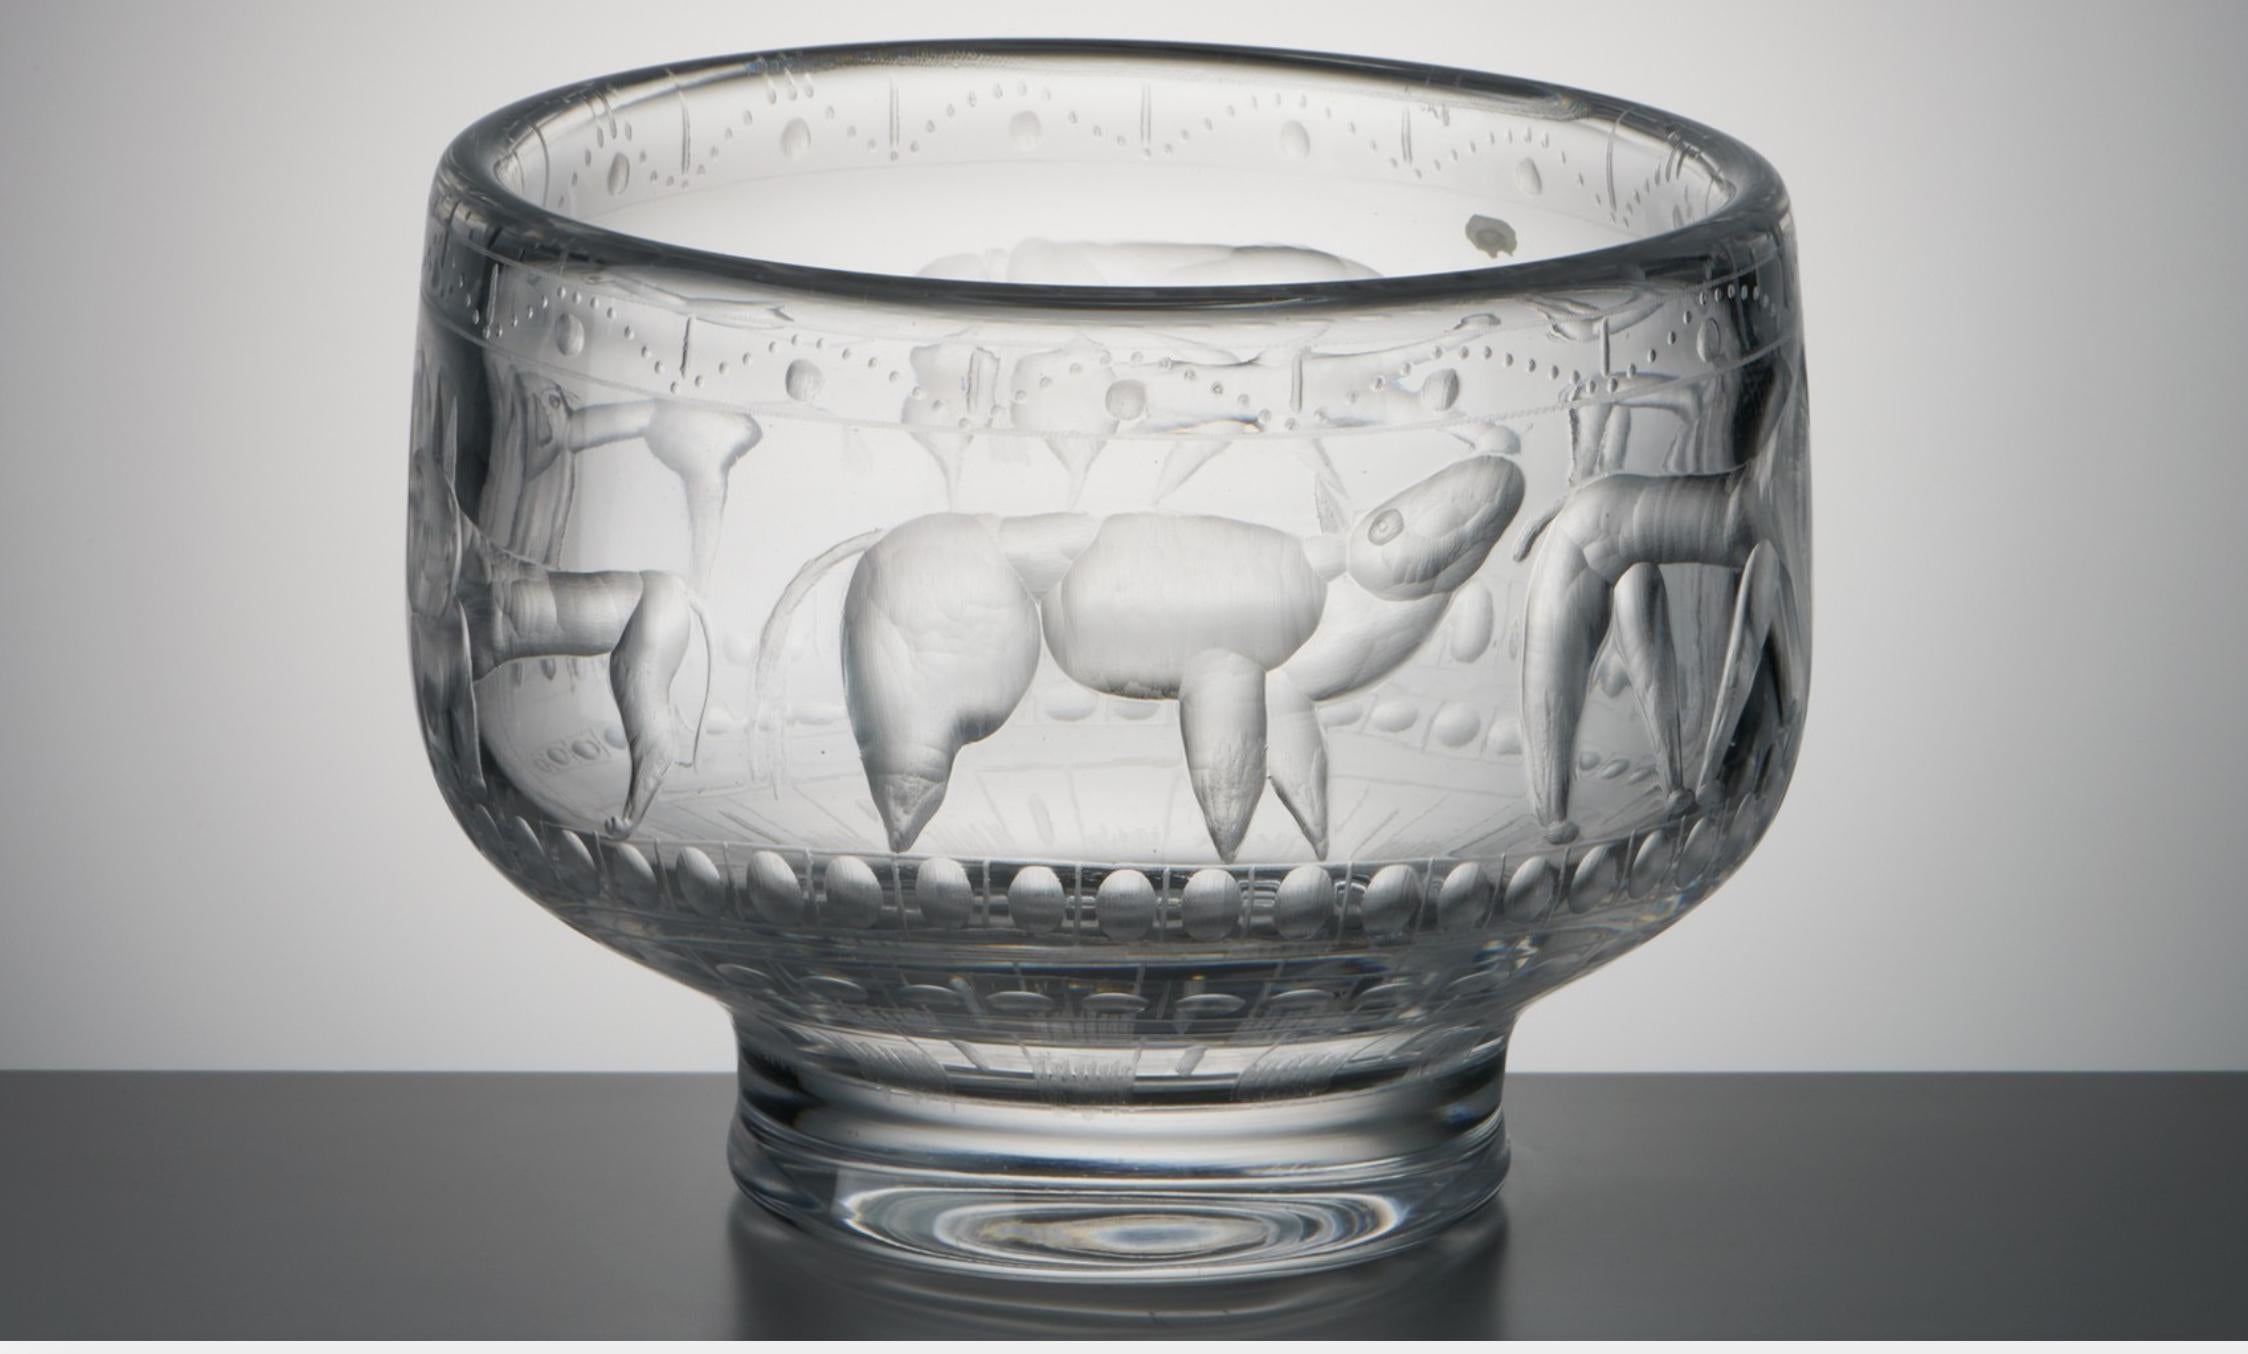 Rarely seen early Surrealist/Expressionist Erik Hoglund glass bowl depicting beastly dogs with over-emphasized musculature and dimensionality. Diamond etched 